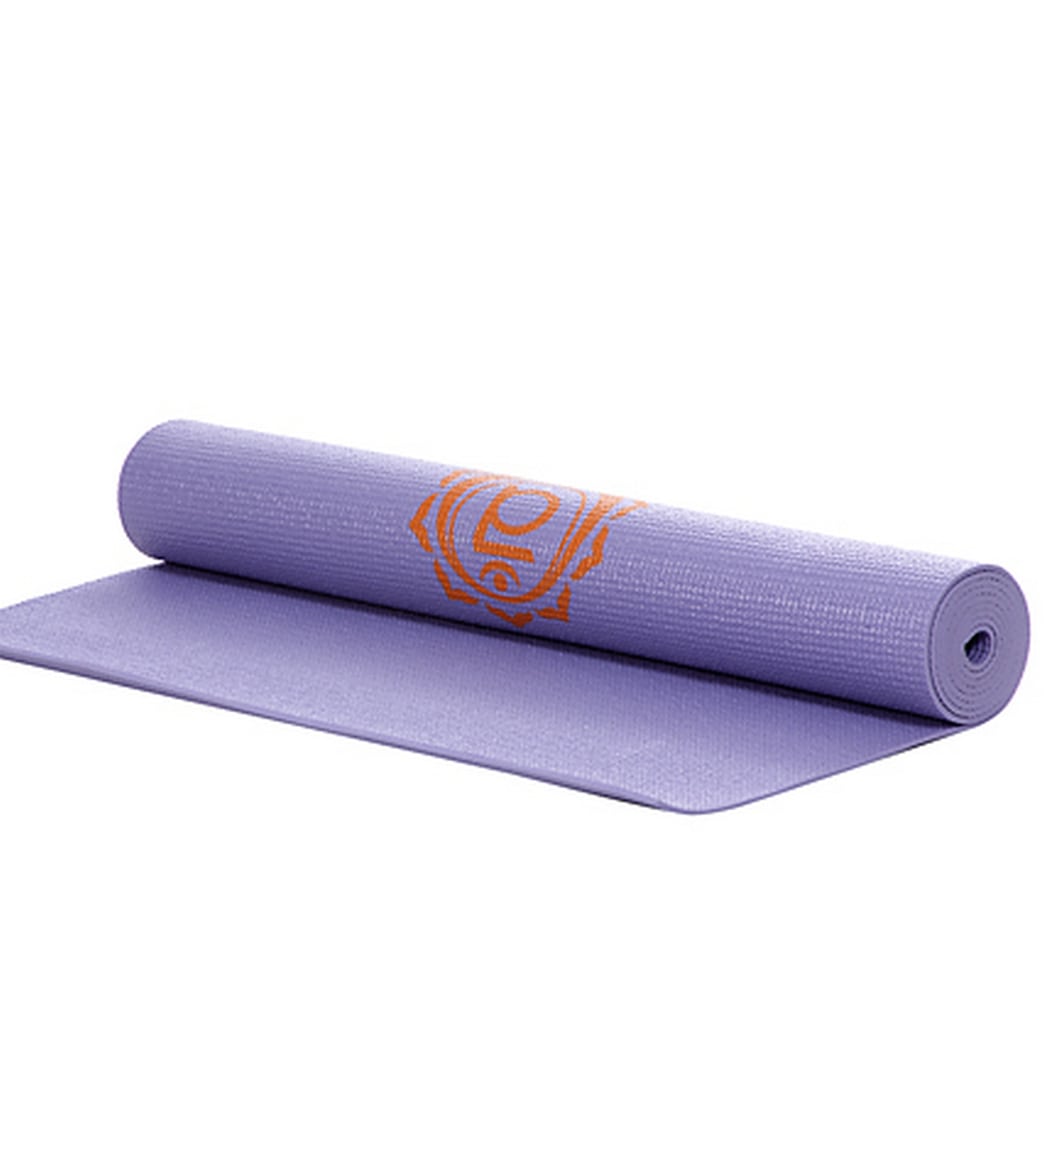 Opening up a new Gaiam yoga mat, and 3 weeks later report 